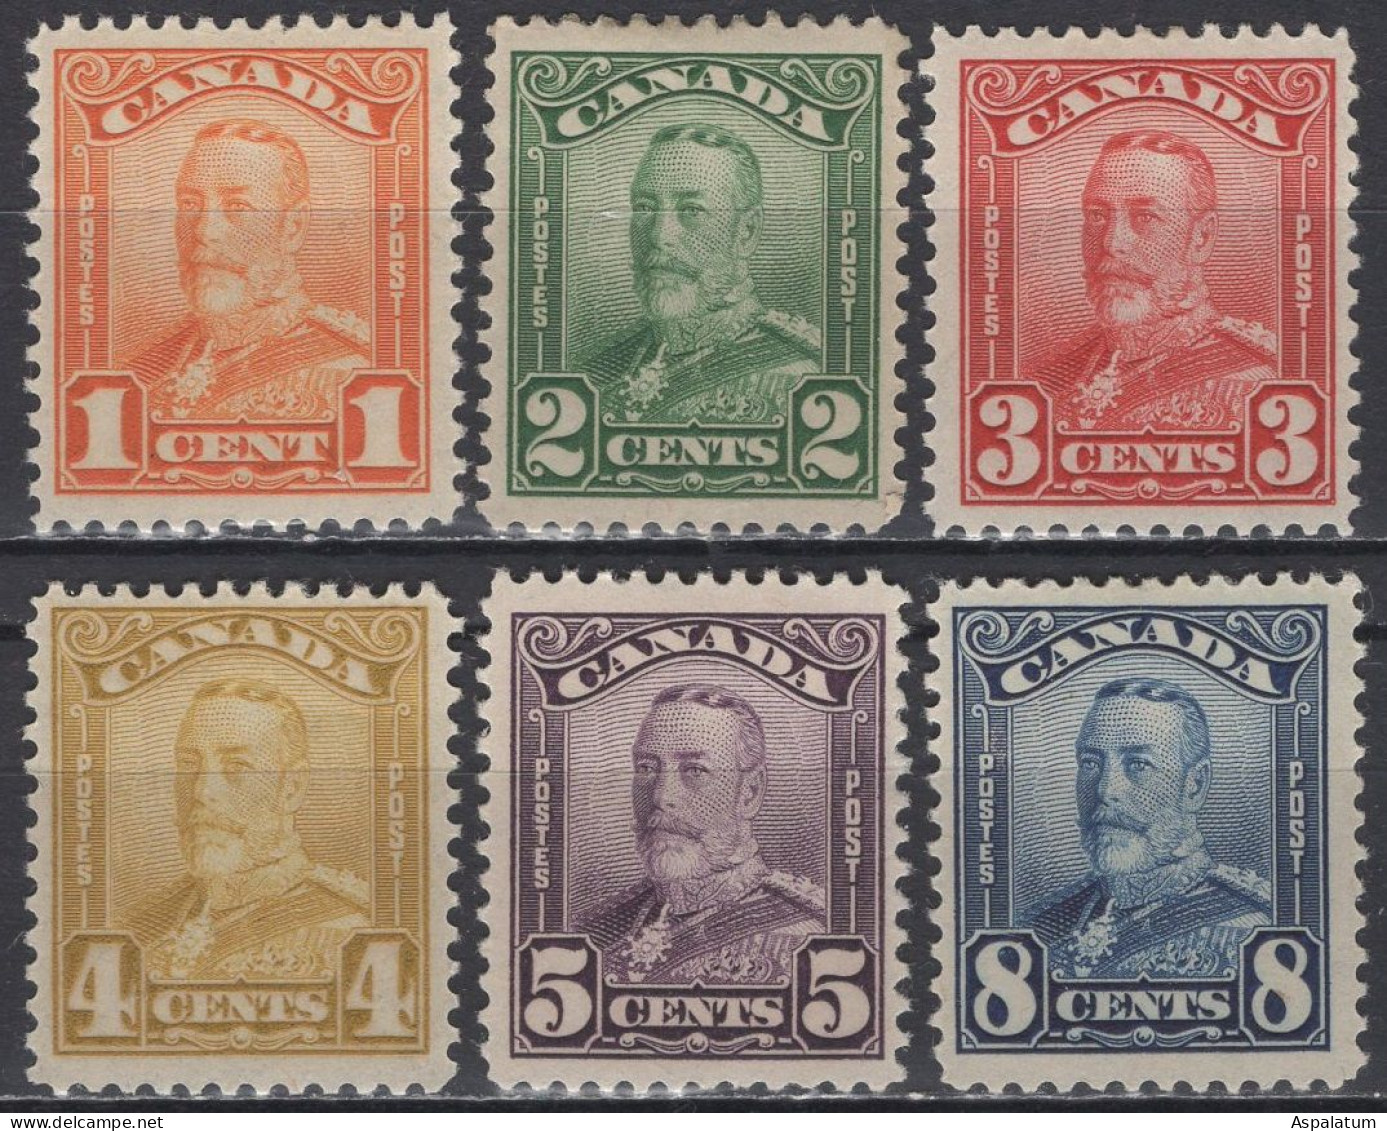 Canada - Definitives - Set Of 6 - KGV - Mi 128A~133A - 1928/29 - Unused Stamps